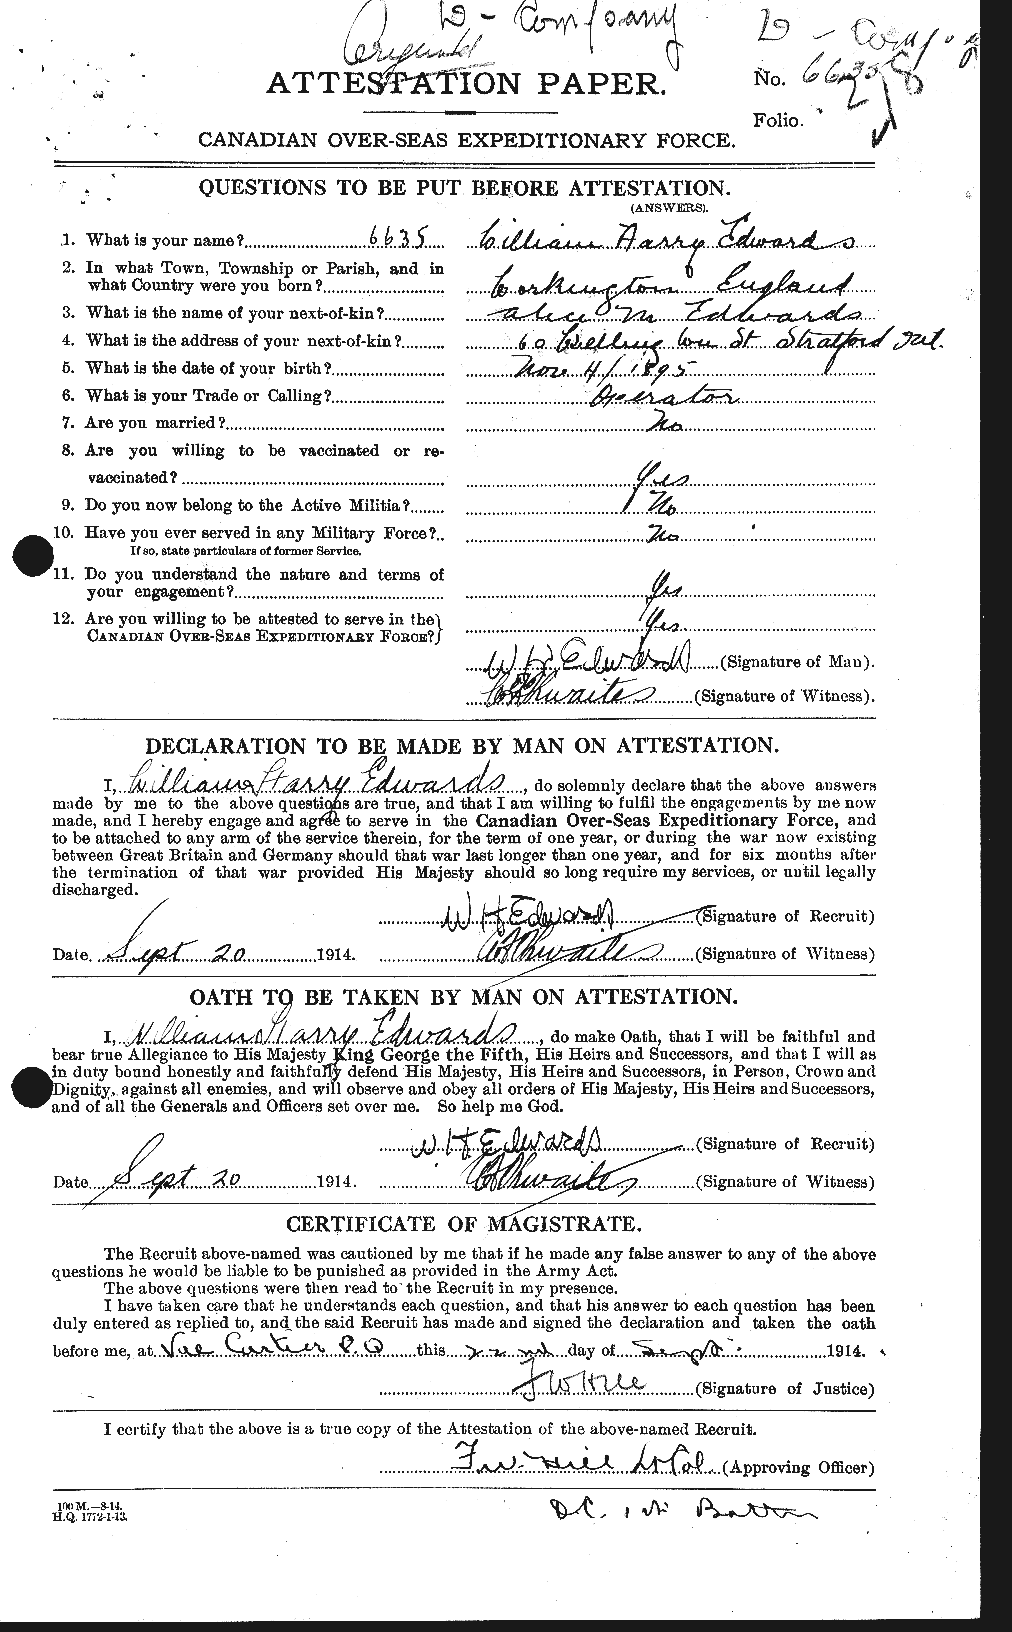 Personnel Records of the First World War - CEF 310429a